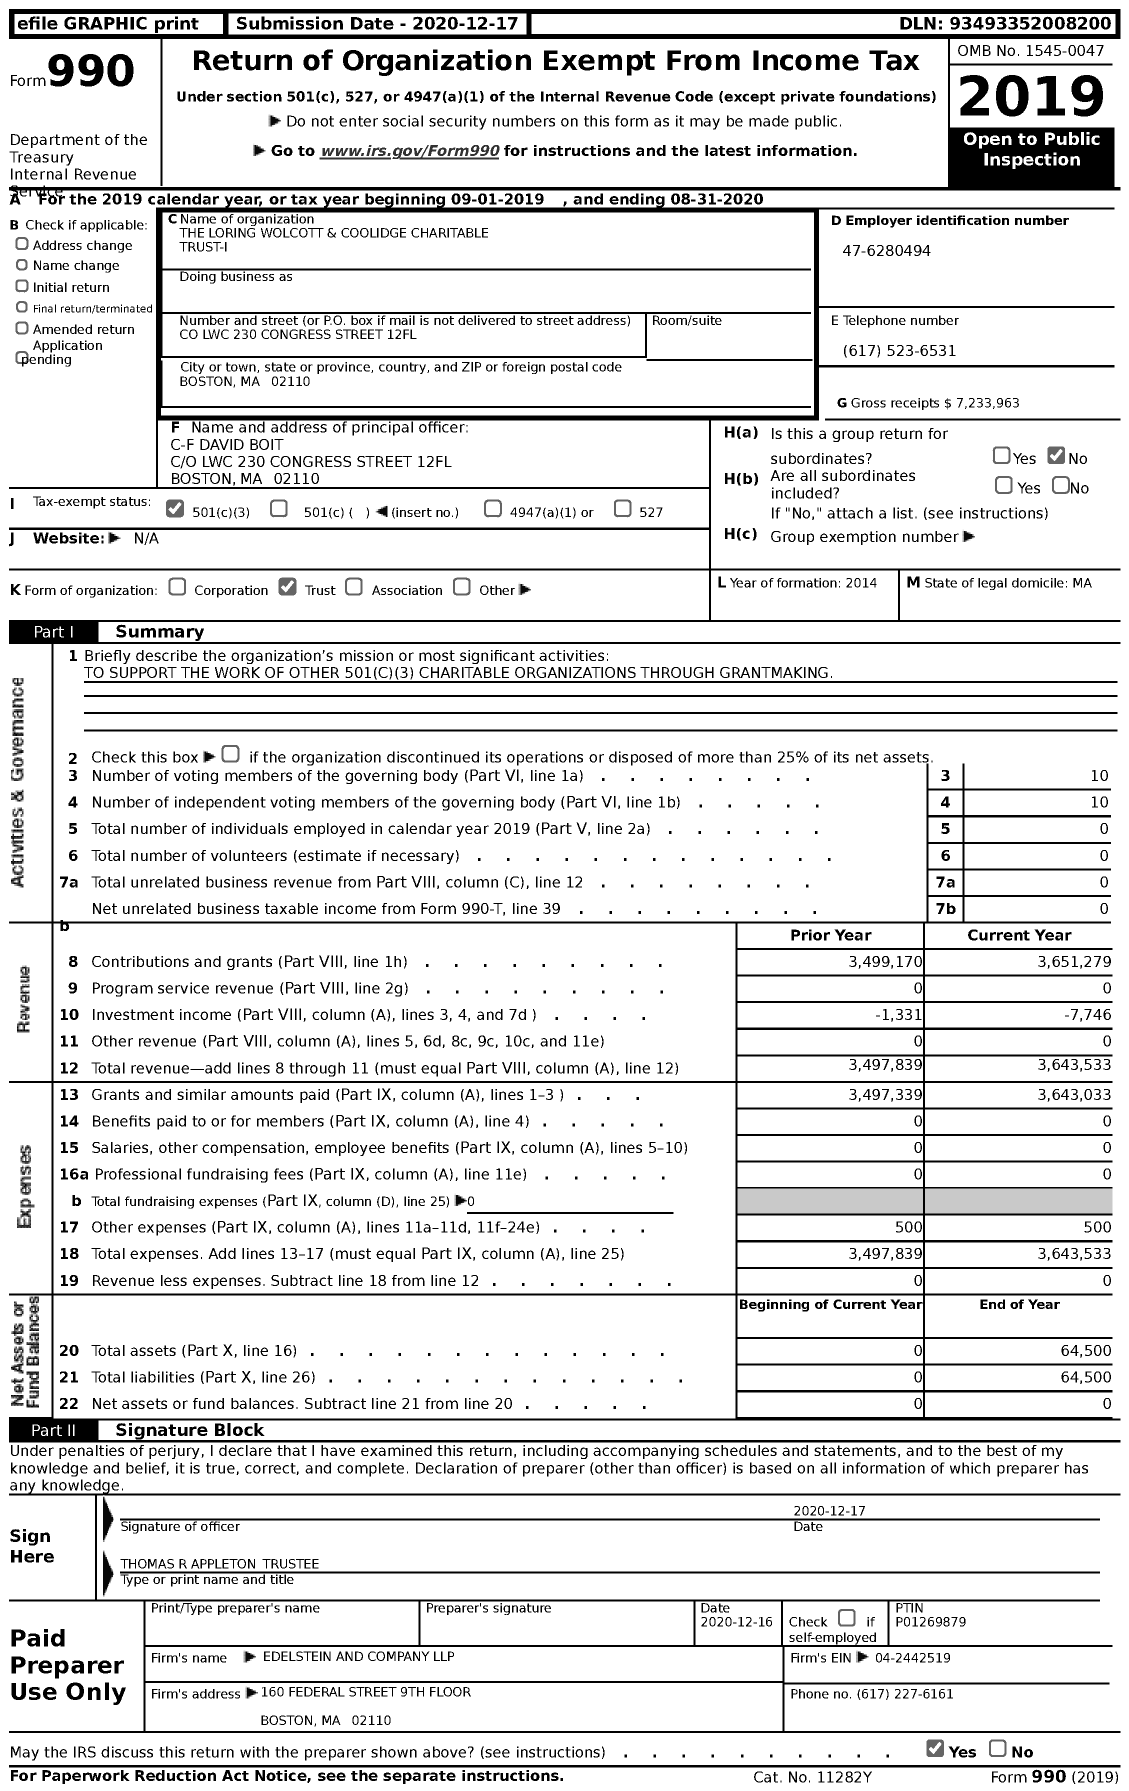 Image of first page of 2019 Form 990 for Loring, Wolcott & Coolidge